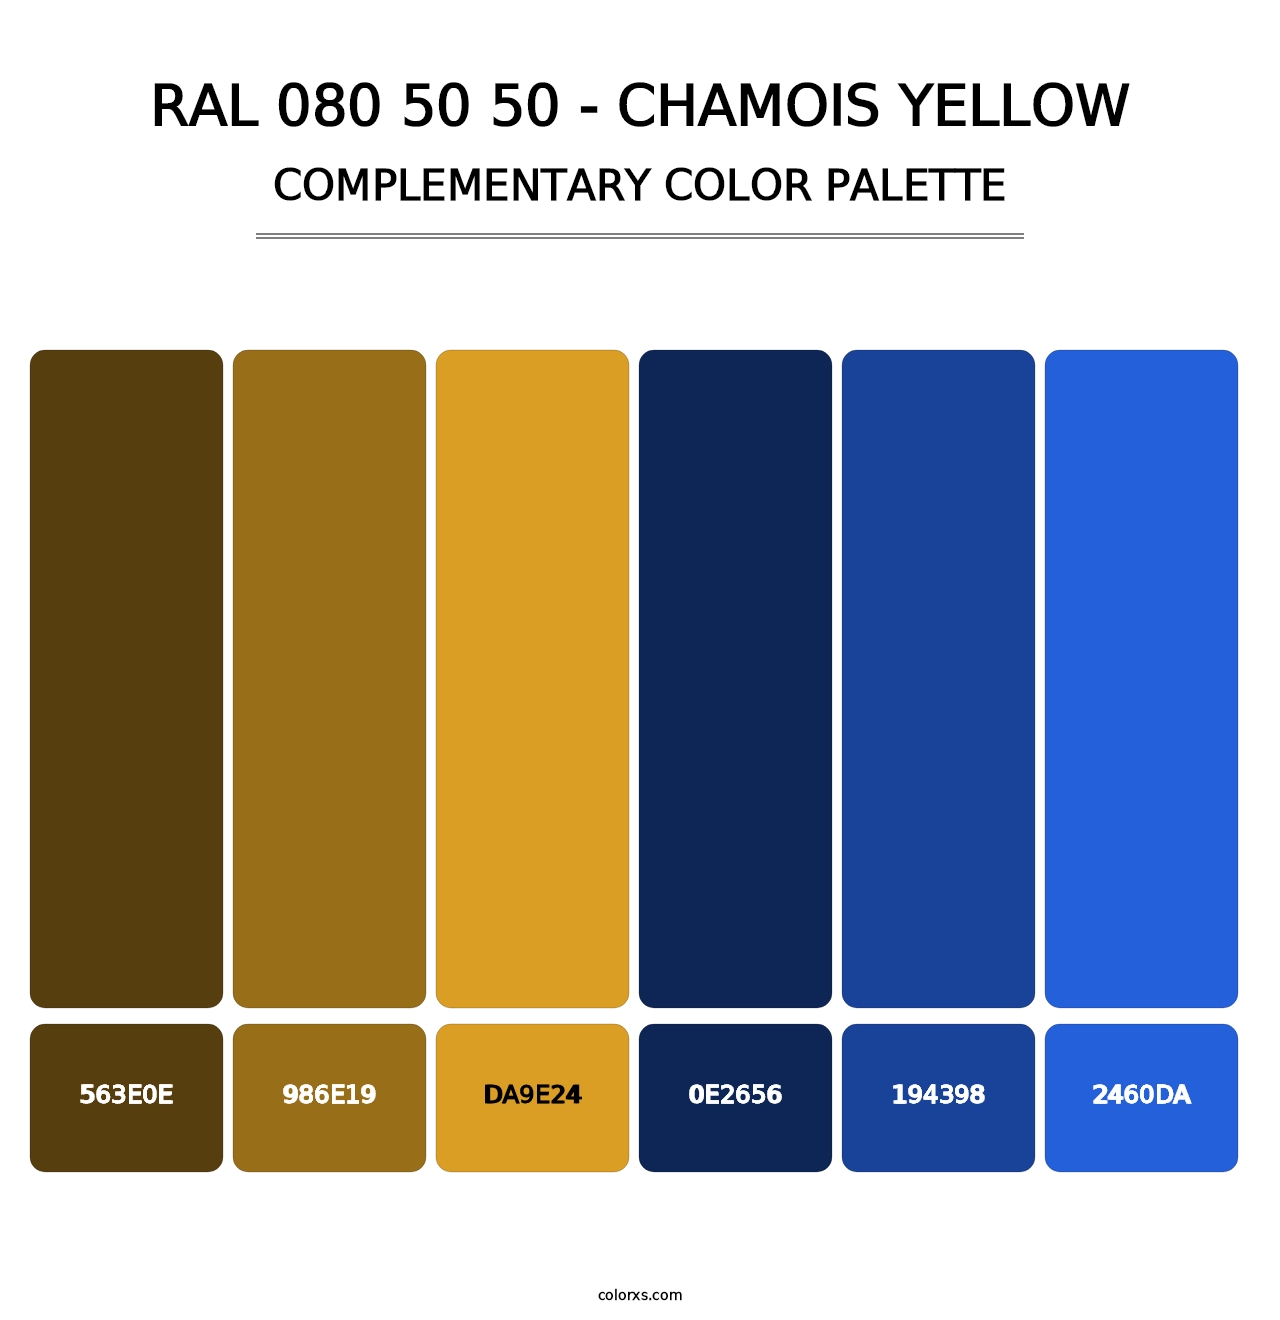 RAL 080 50 50 - Chamois Yellow - Complementary Color Palette